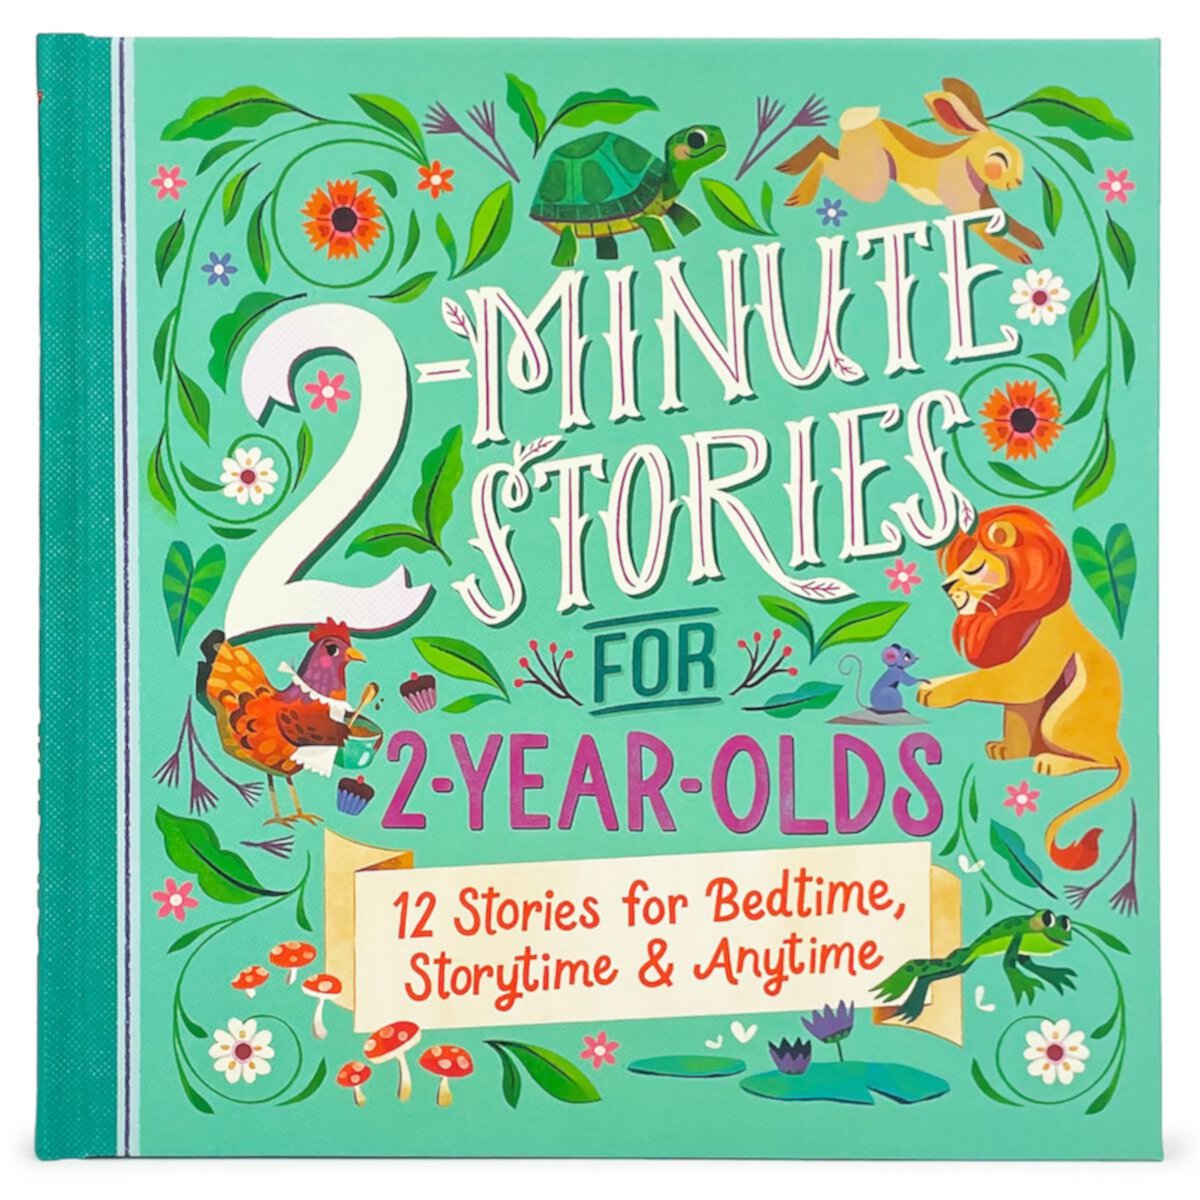 2-Minute Stories for 2-Year-Olds by Cottage Door Press COTTAGE DOOR PRESS